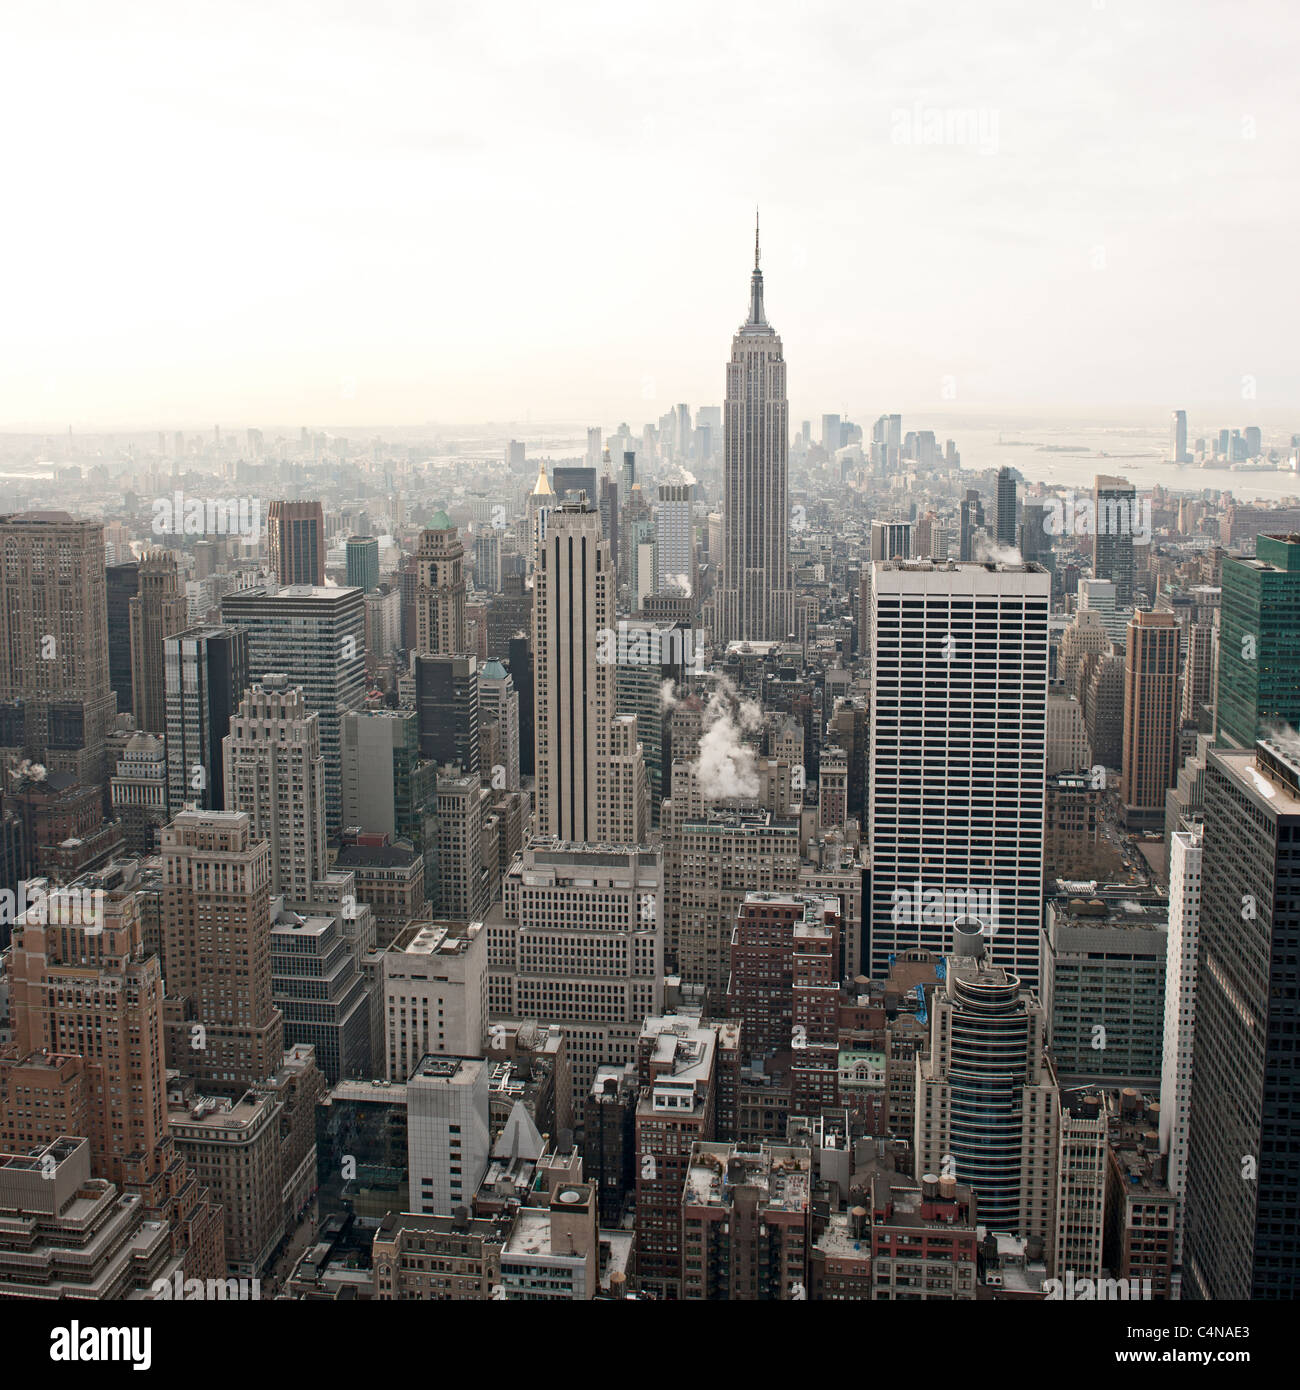 New York City skyline view from Rockefeller Center, New York, USA Banque D'Images